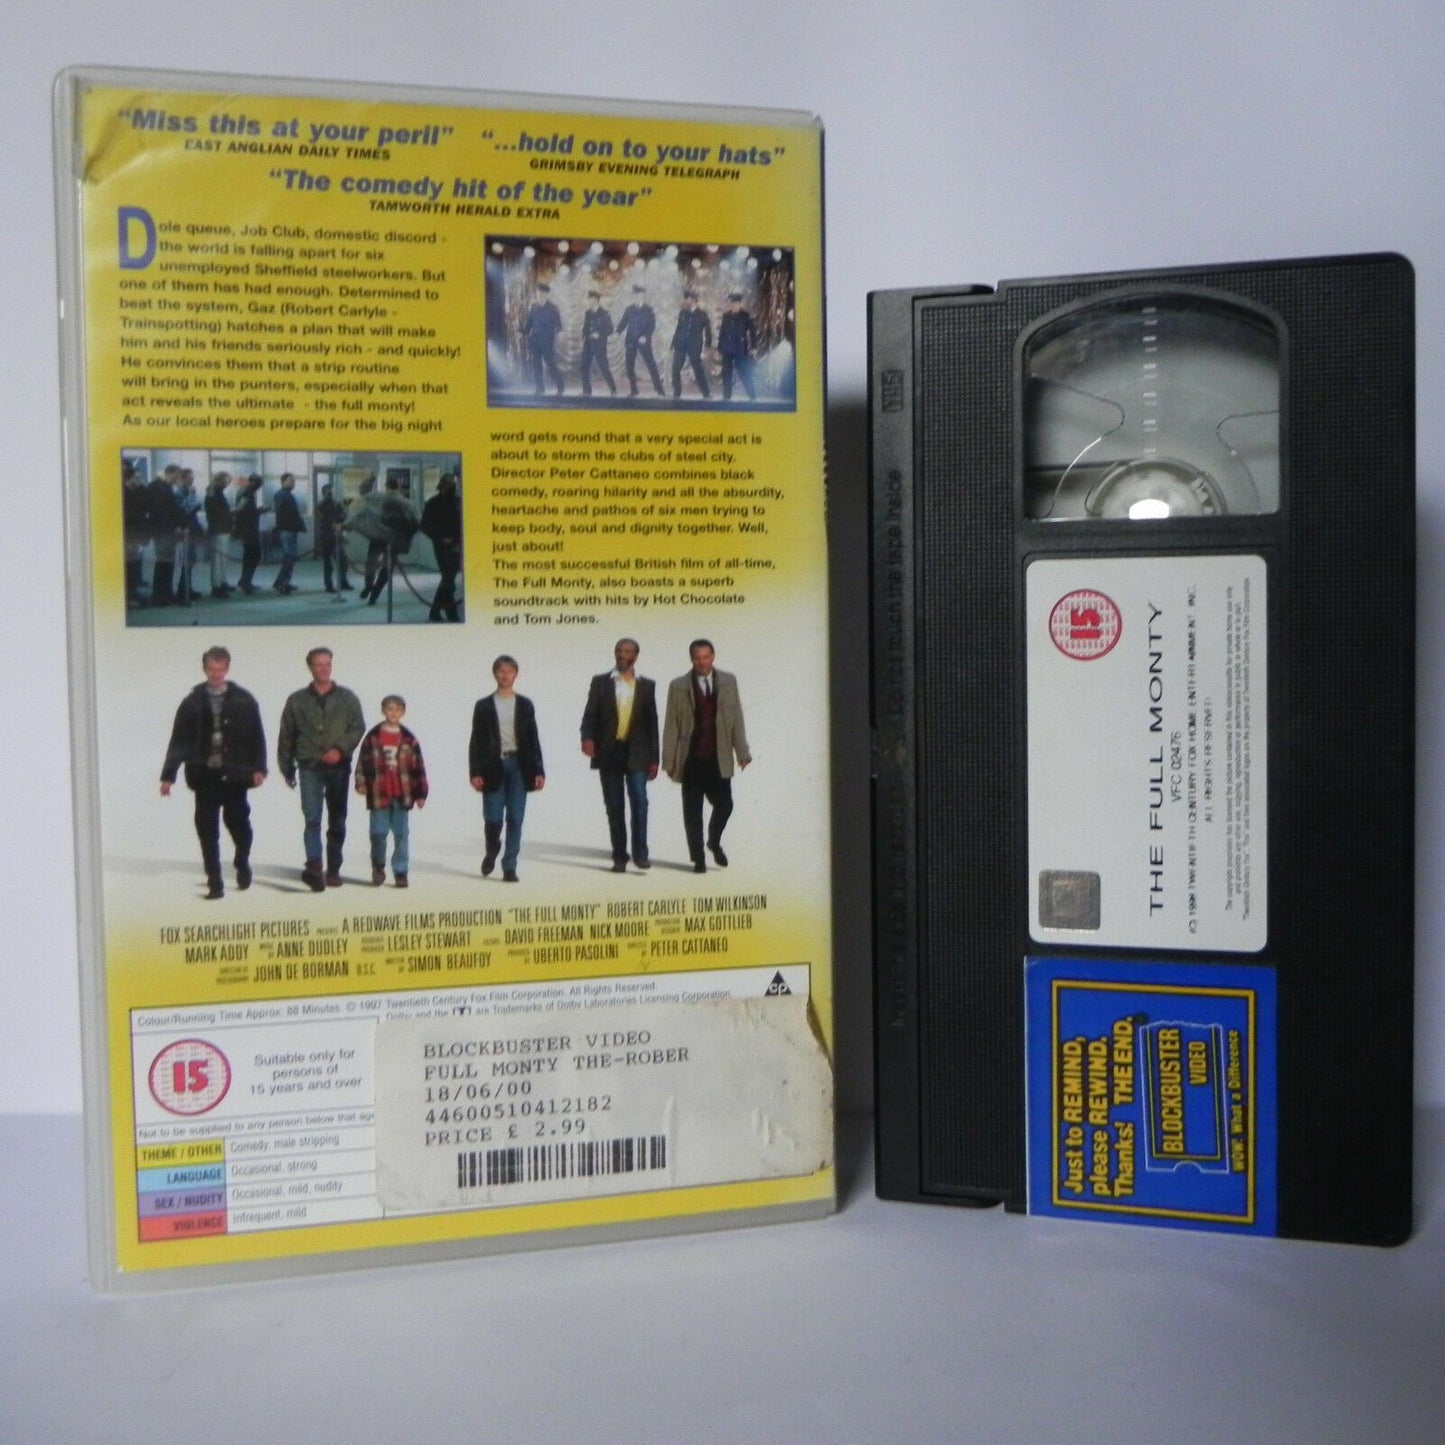 The Full Monty - Large Box Rental - A Favourite Comedy - Robert Carlisyle - VHS-